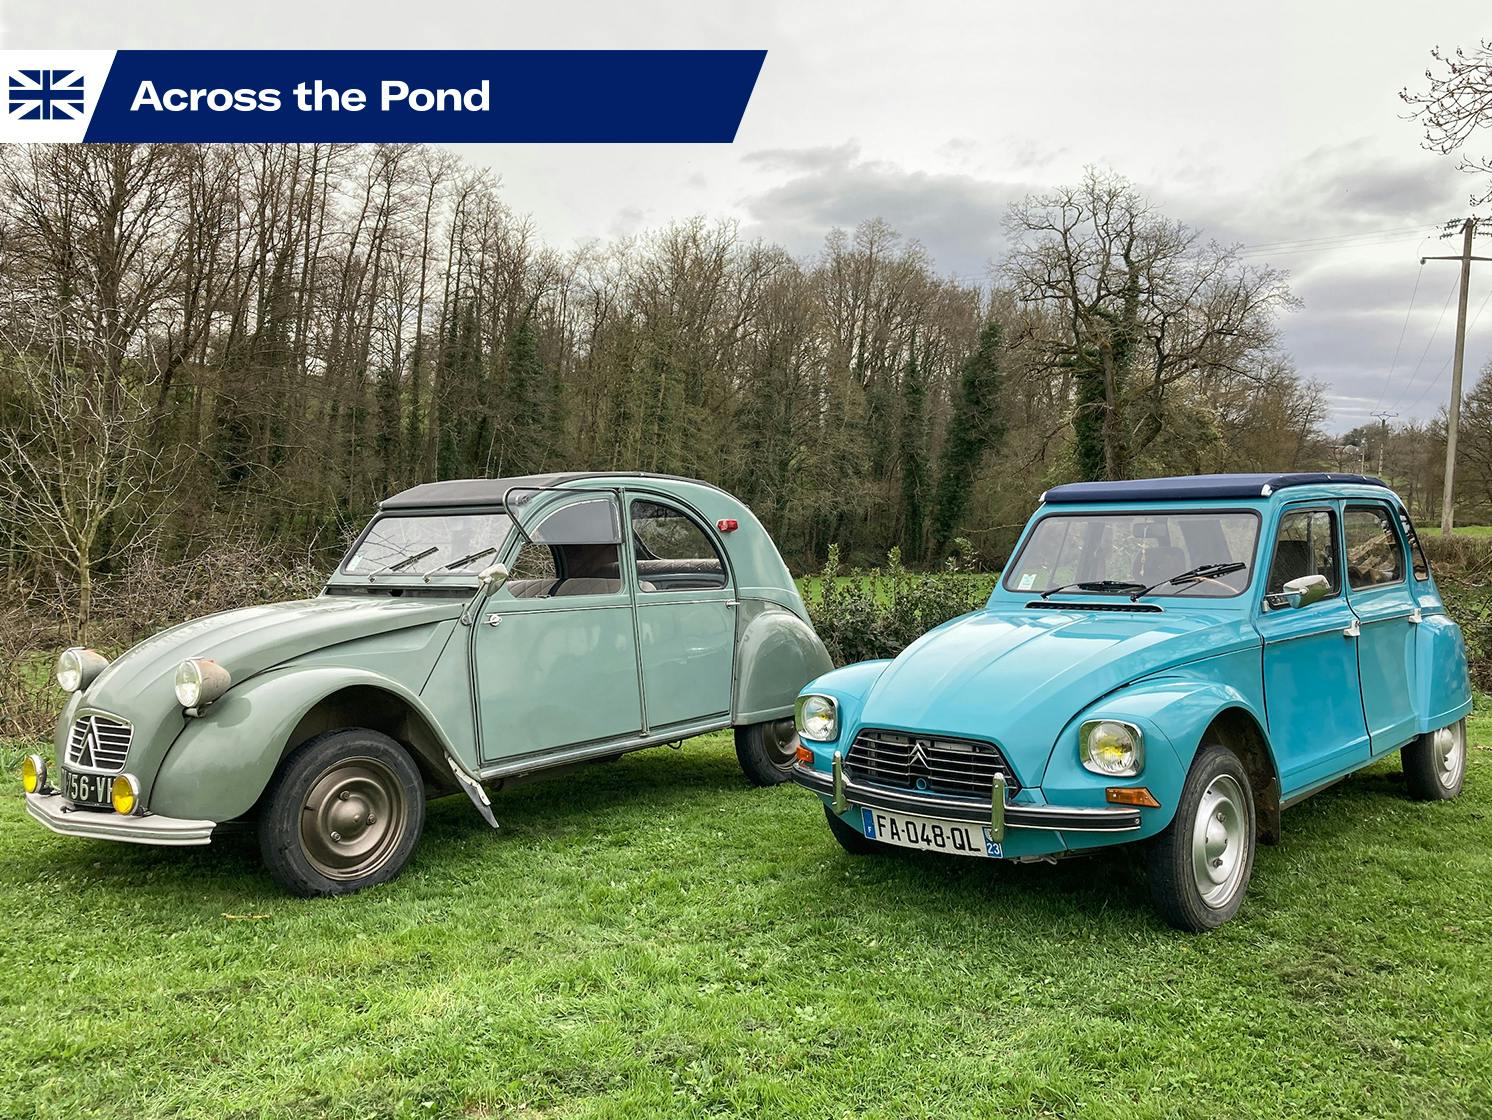 Across-the-pond-citroen-holiday-lead